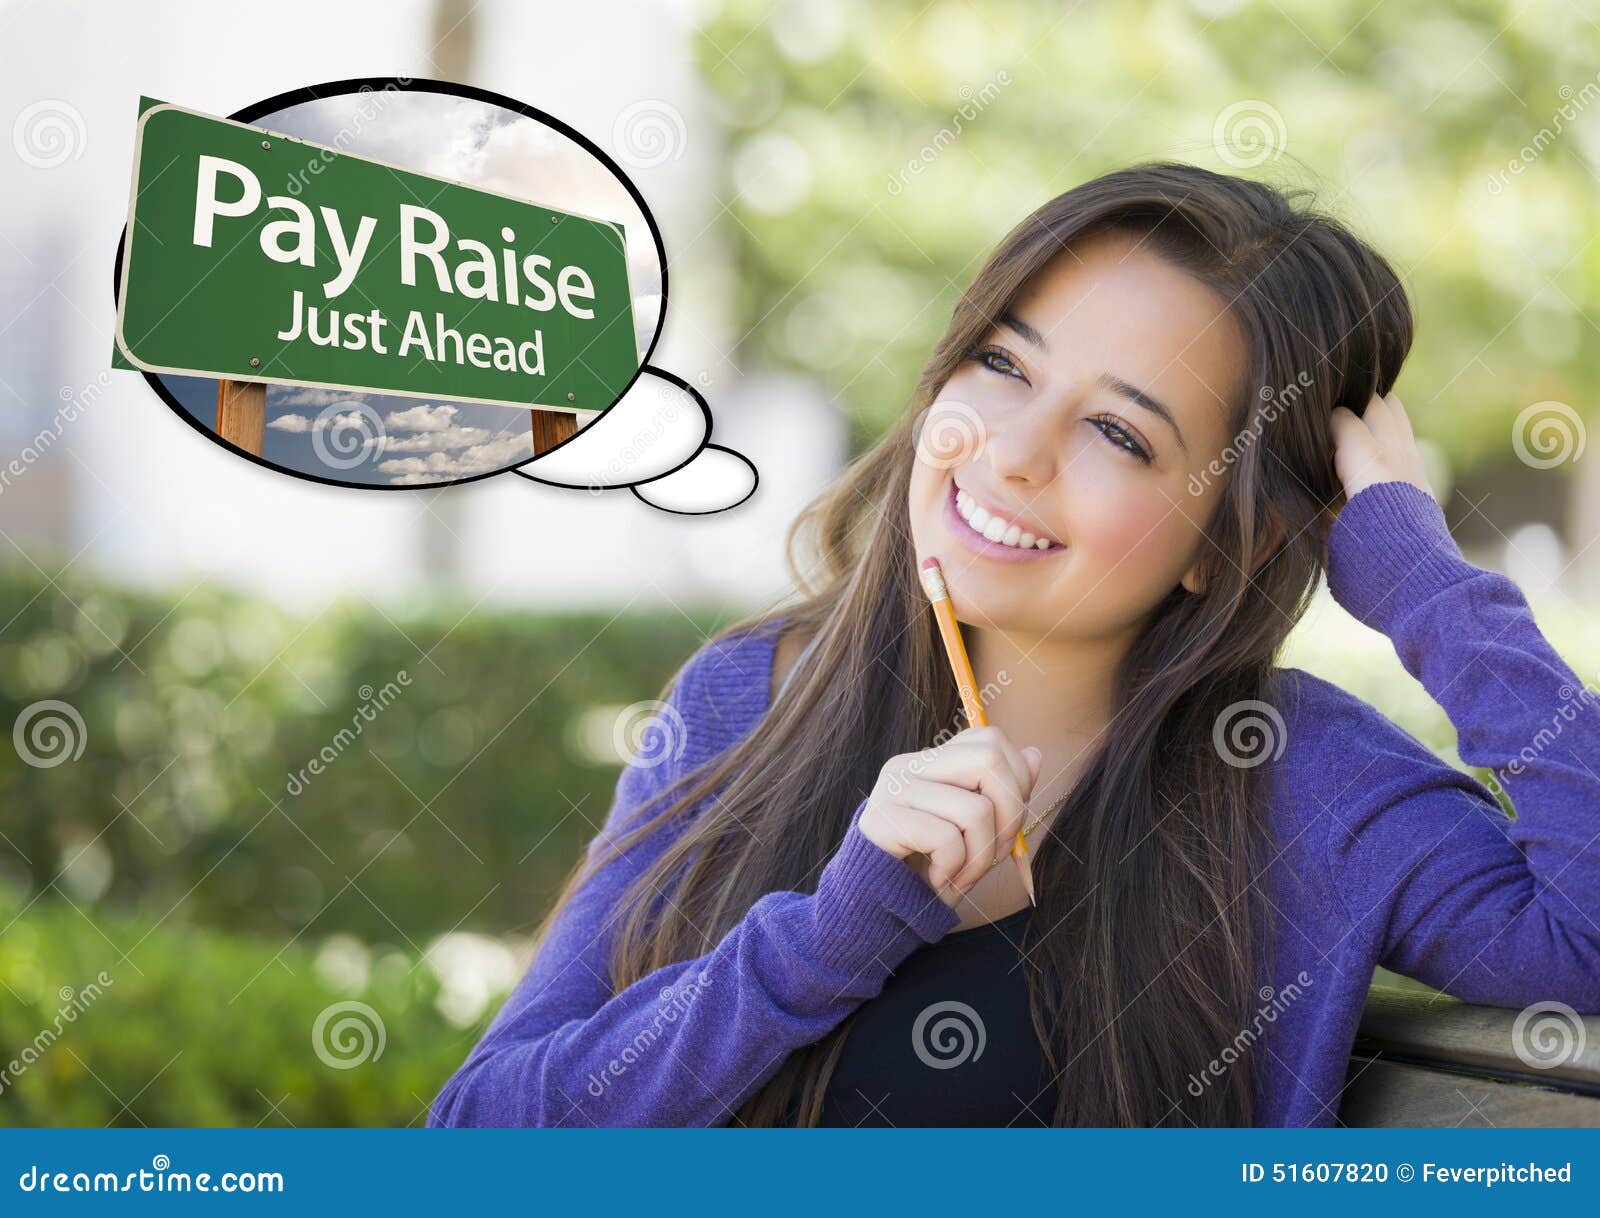 smart woman with thought bubble of pay raise green sign